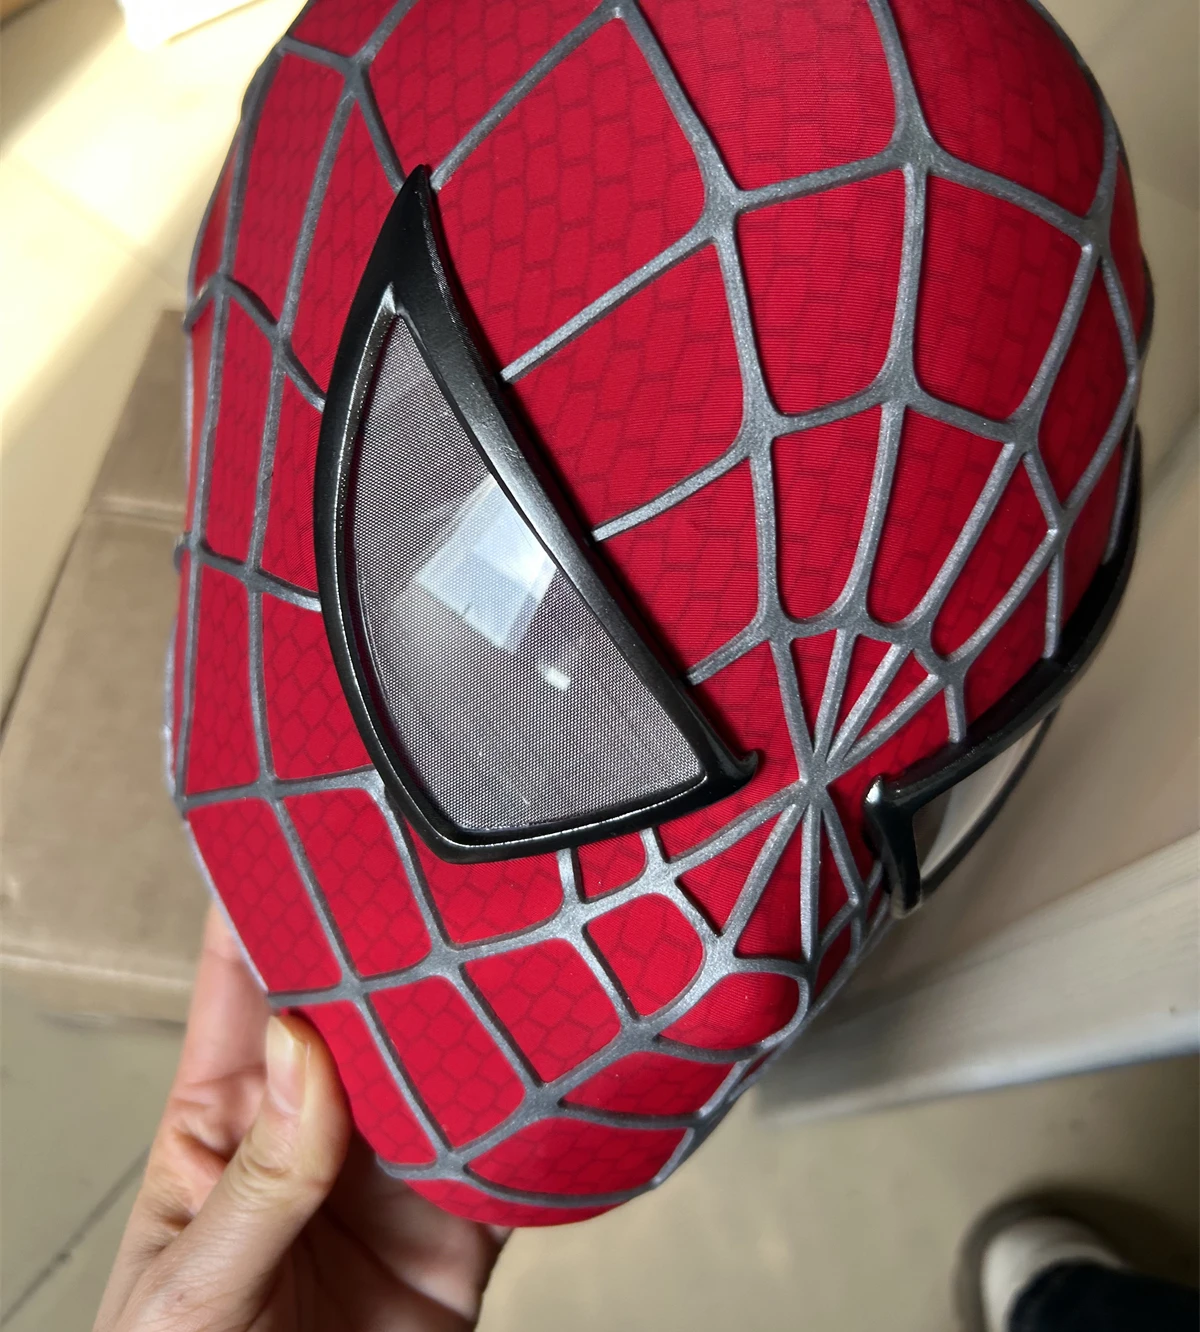 Marvel Spiderman Mask Cosplay Sam Raimi Spiderman Mask with Faceshell & 3D Rubber Webs, Wearable Movie Prop Replica Adults Gift